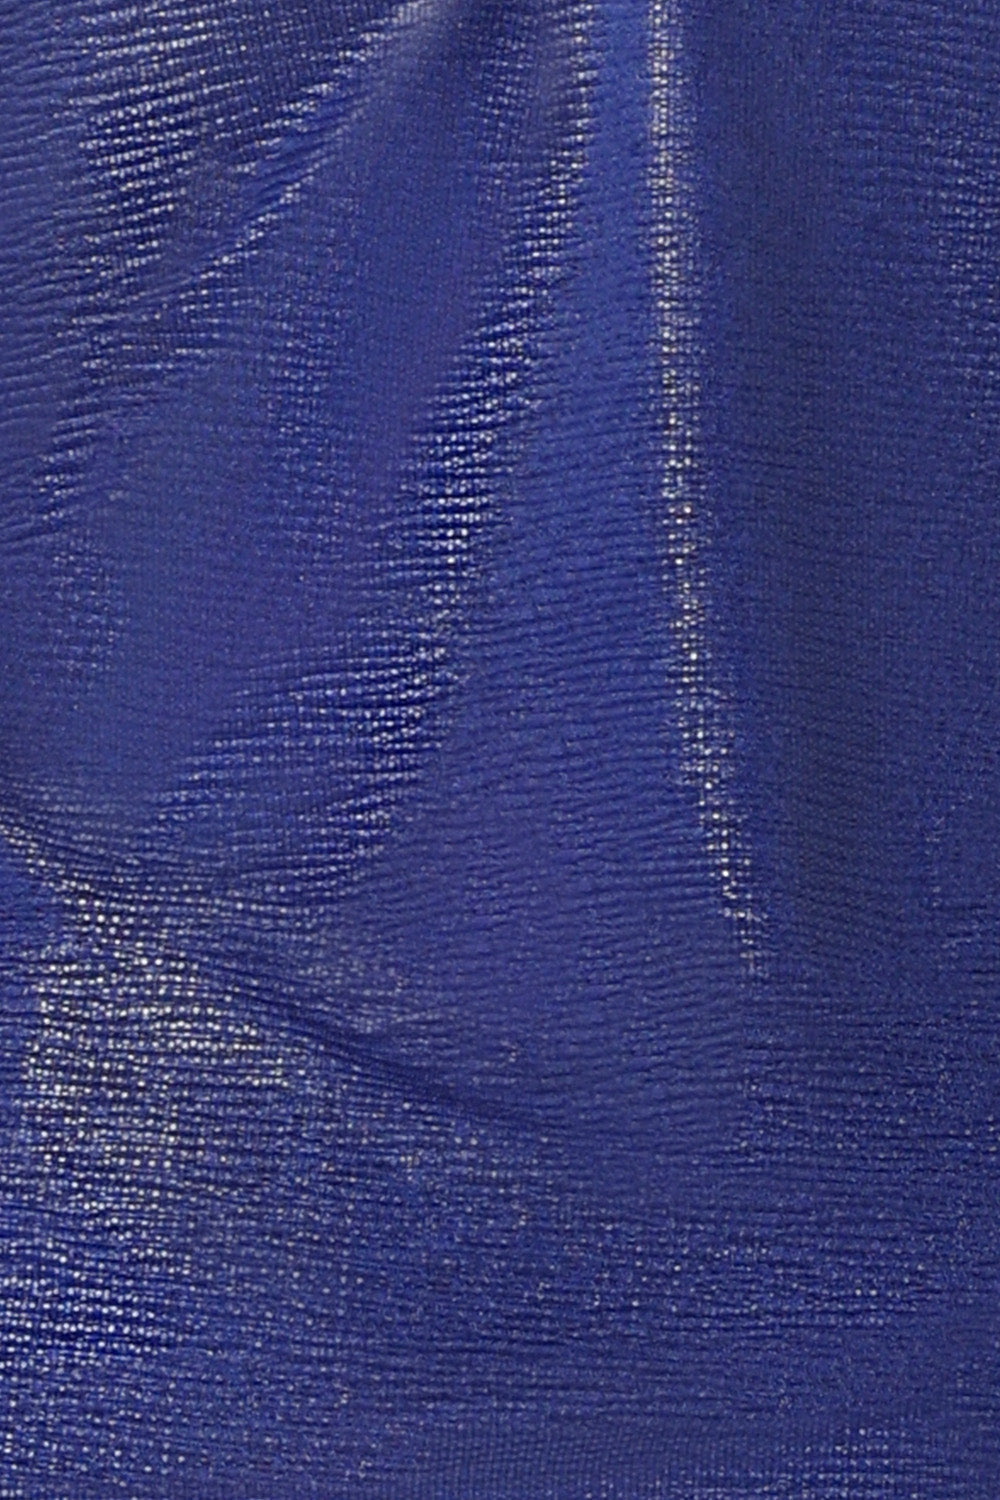 swatch of Australian and New Zealand fashion label L&F's cobalt Xanadu fabric. Part of of our exclusive Up Late party collection, Cobalt shimmer jersey is used for stylish Australian made tops, skirts and accessories in sizes 8-24. 